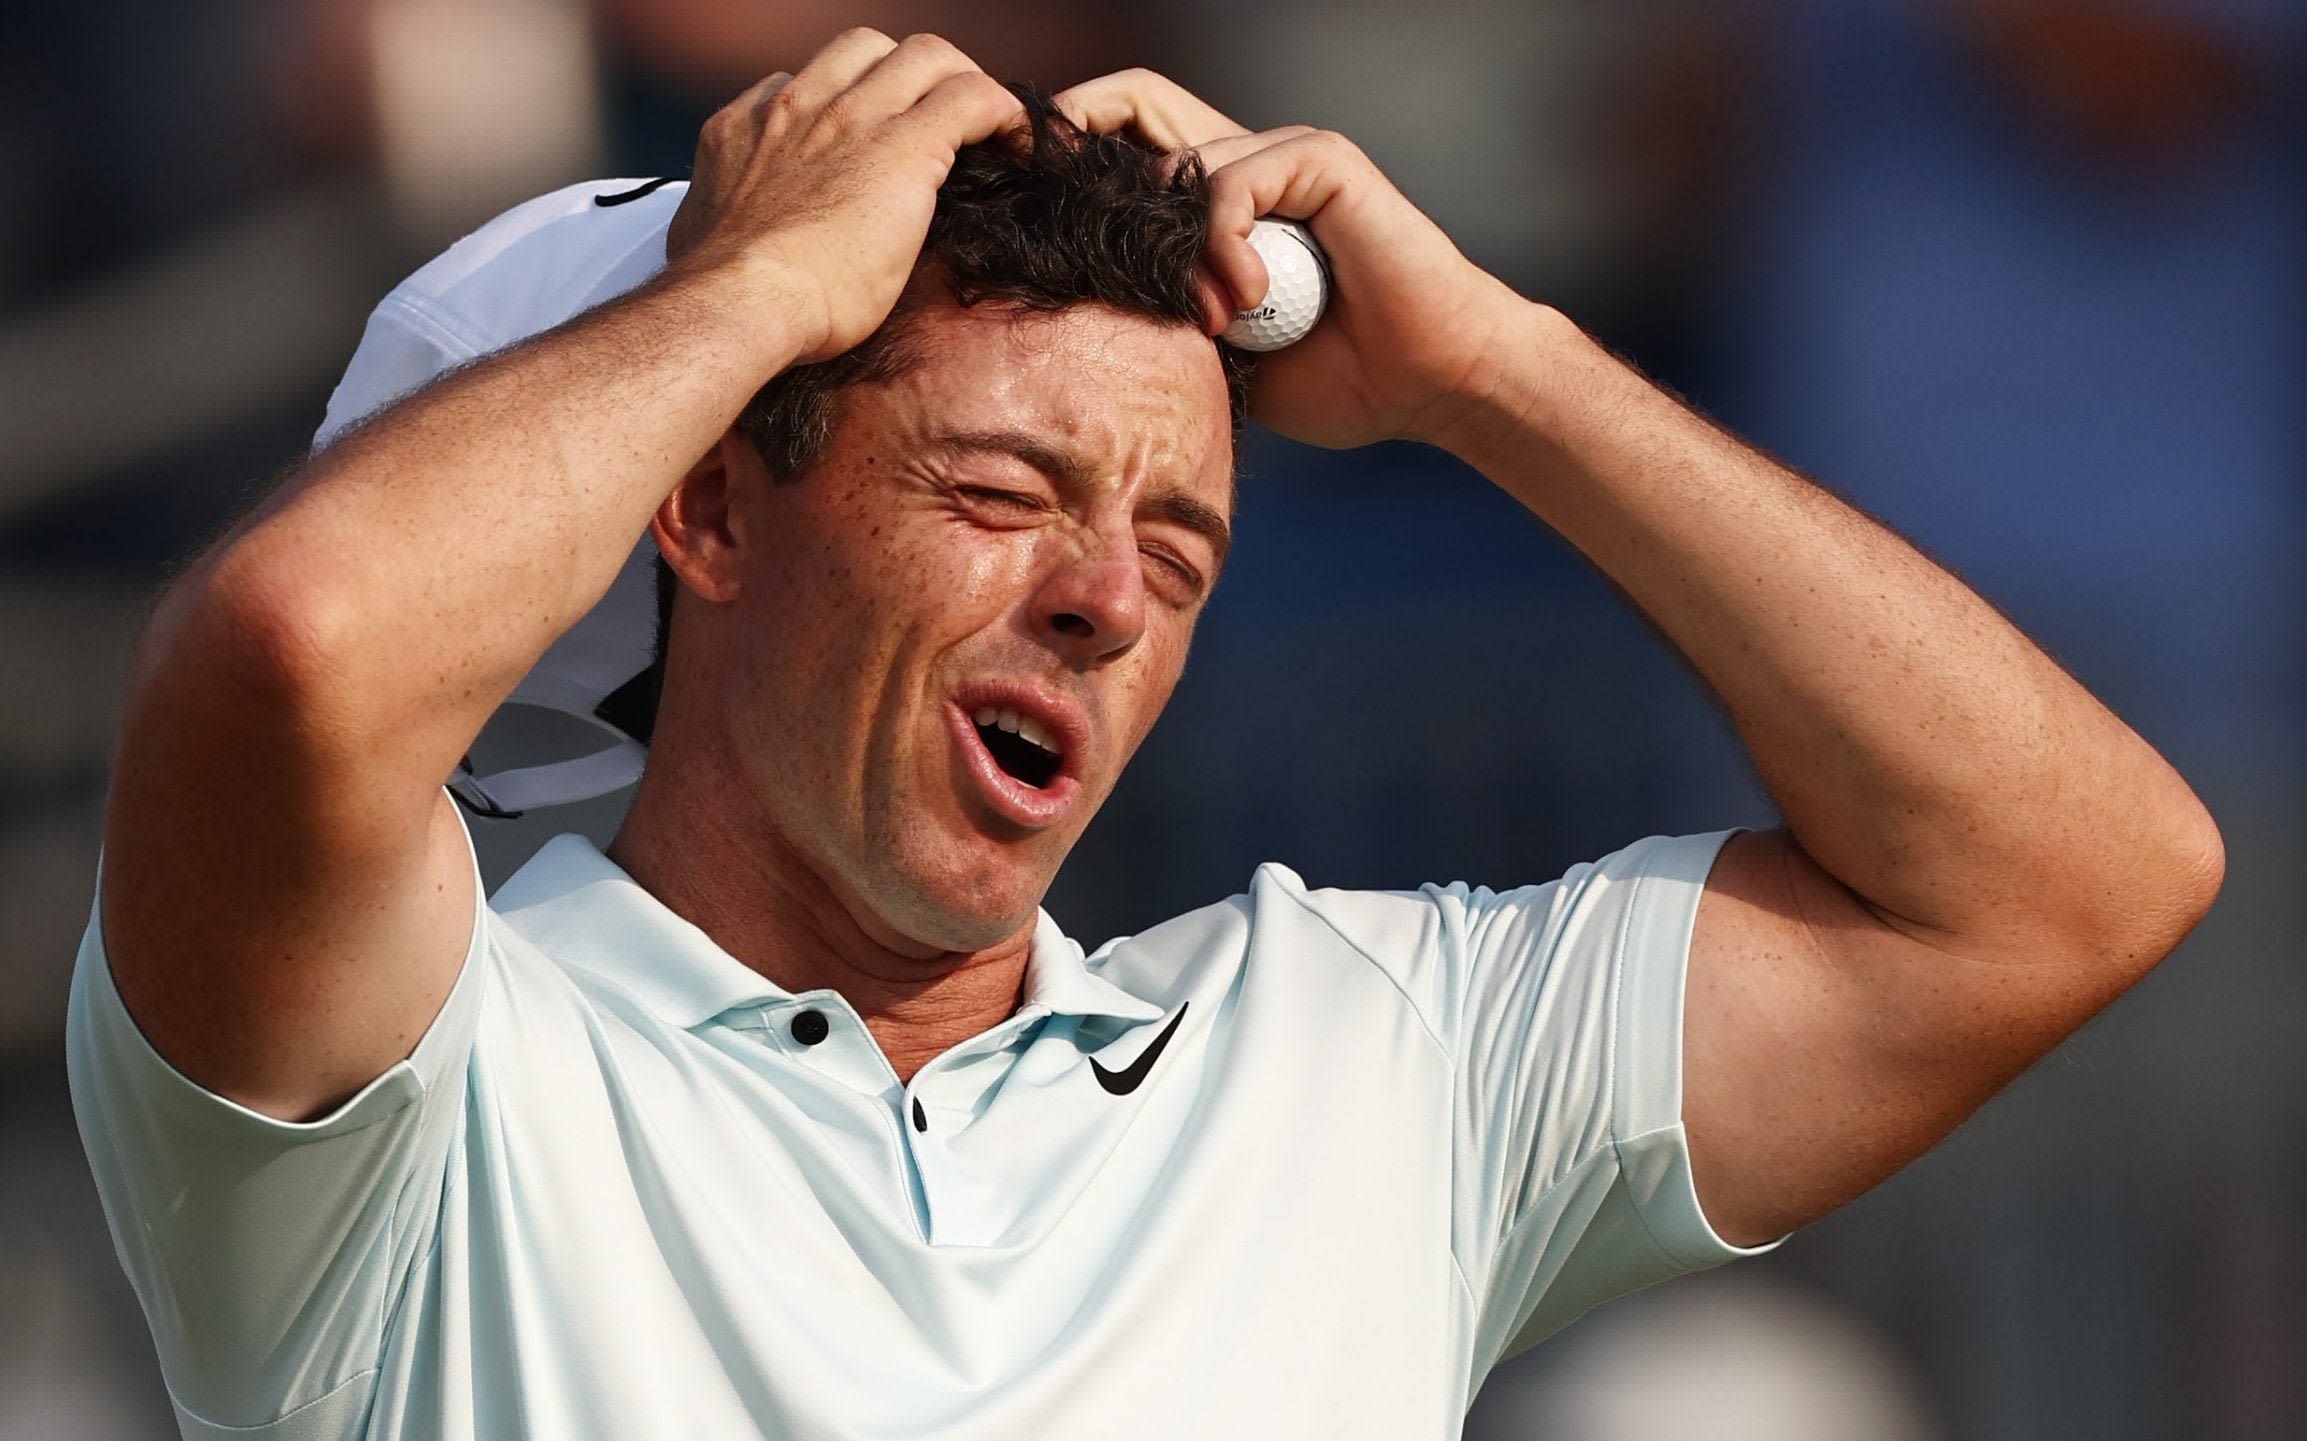 Rory McIlroy’s problem is the major obsession has consumed his life